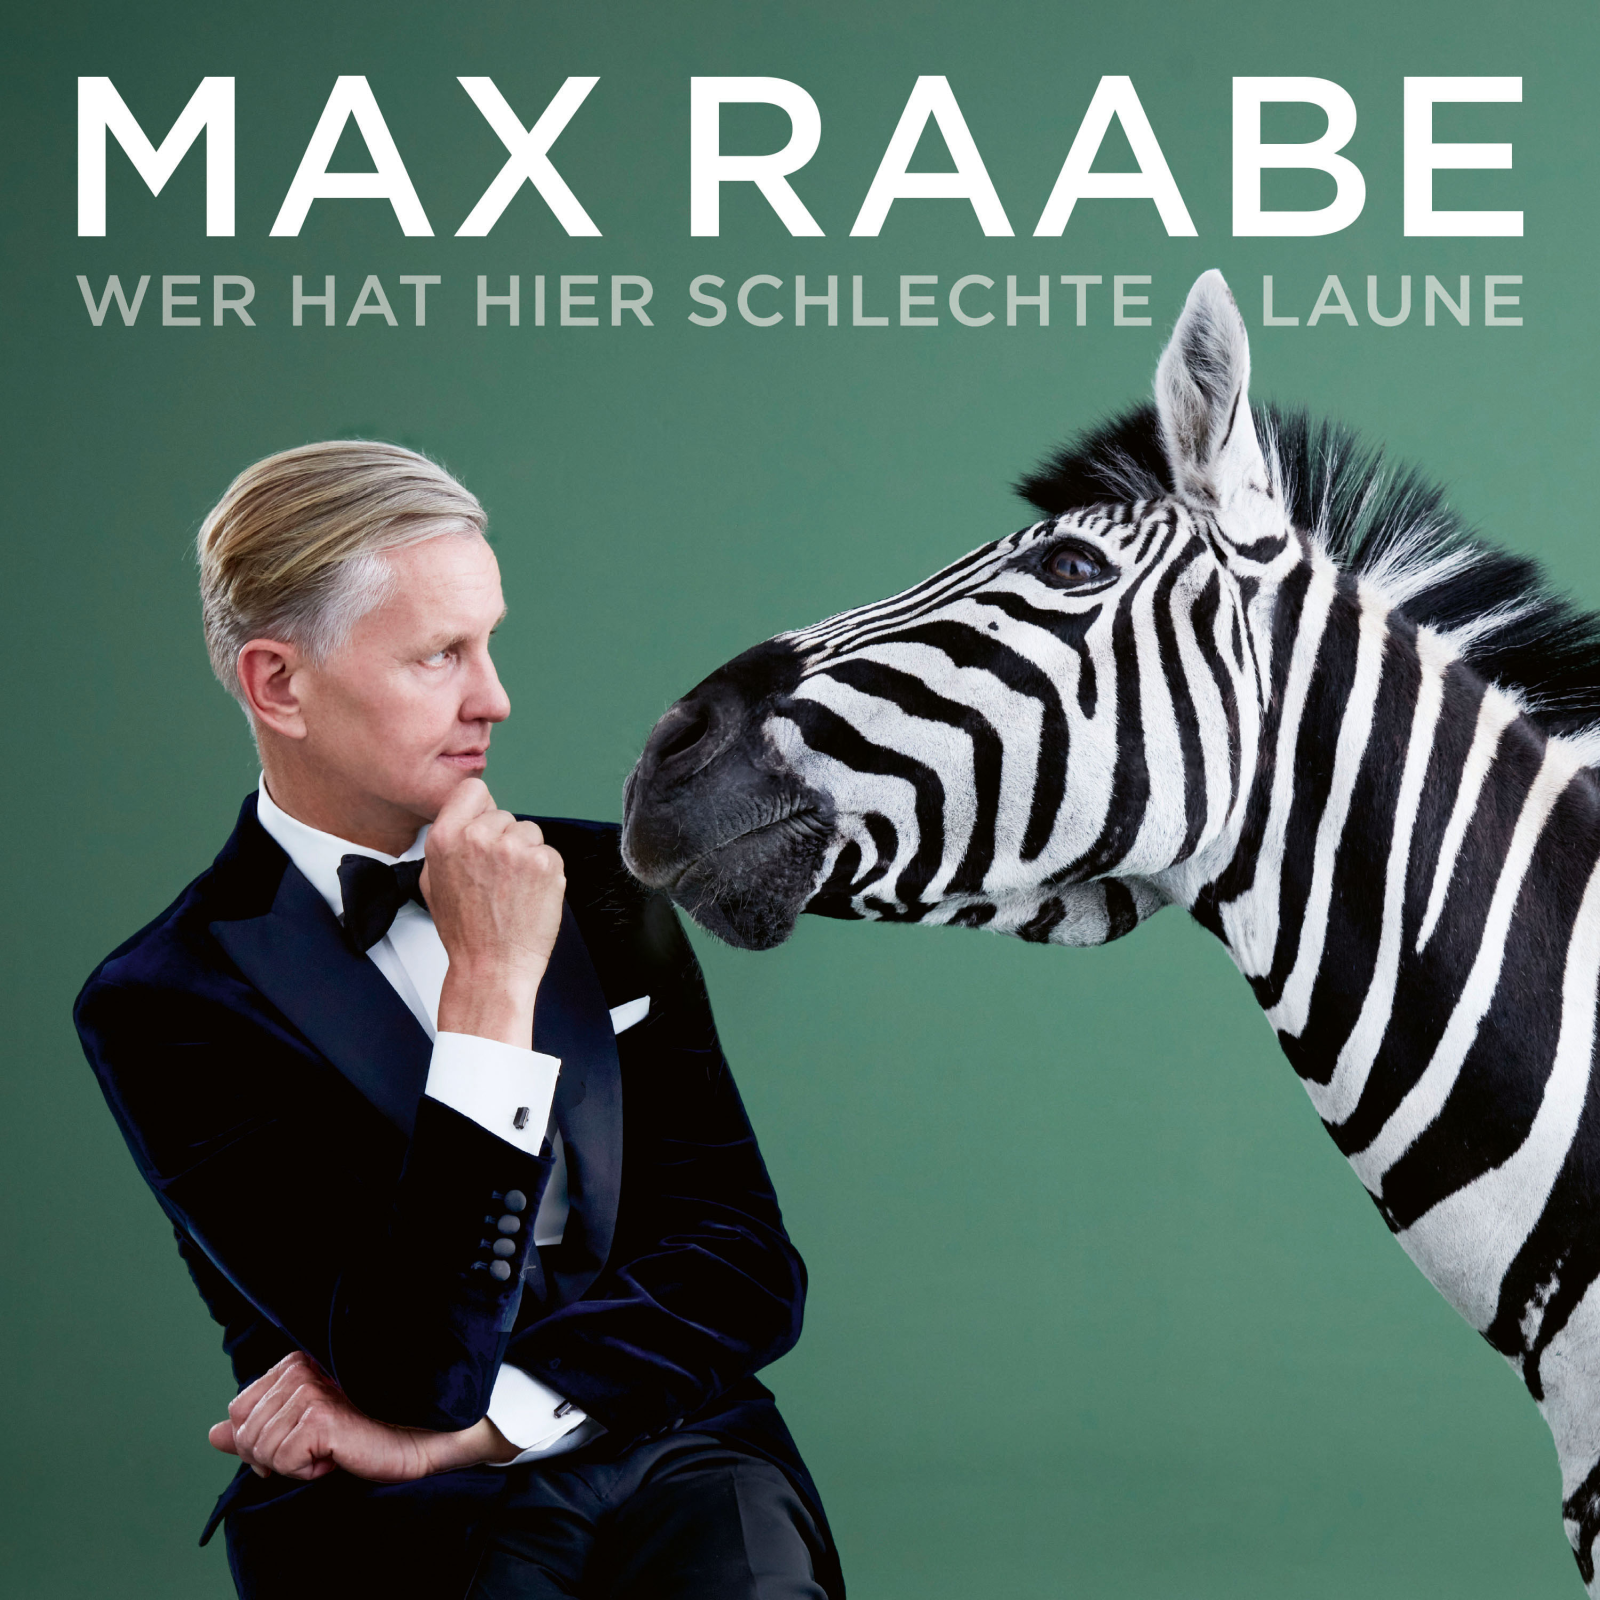 Max Raabe & Palast Orchester Tournee 2023/24